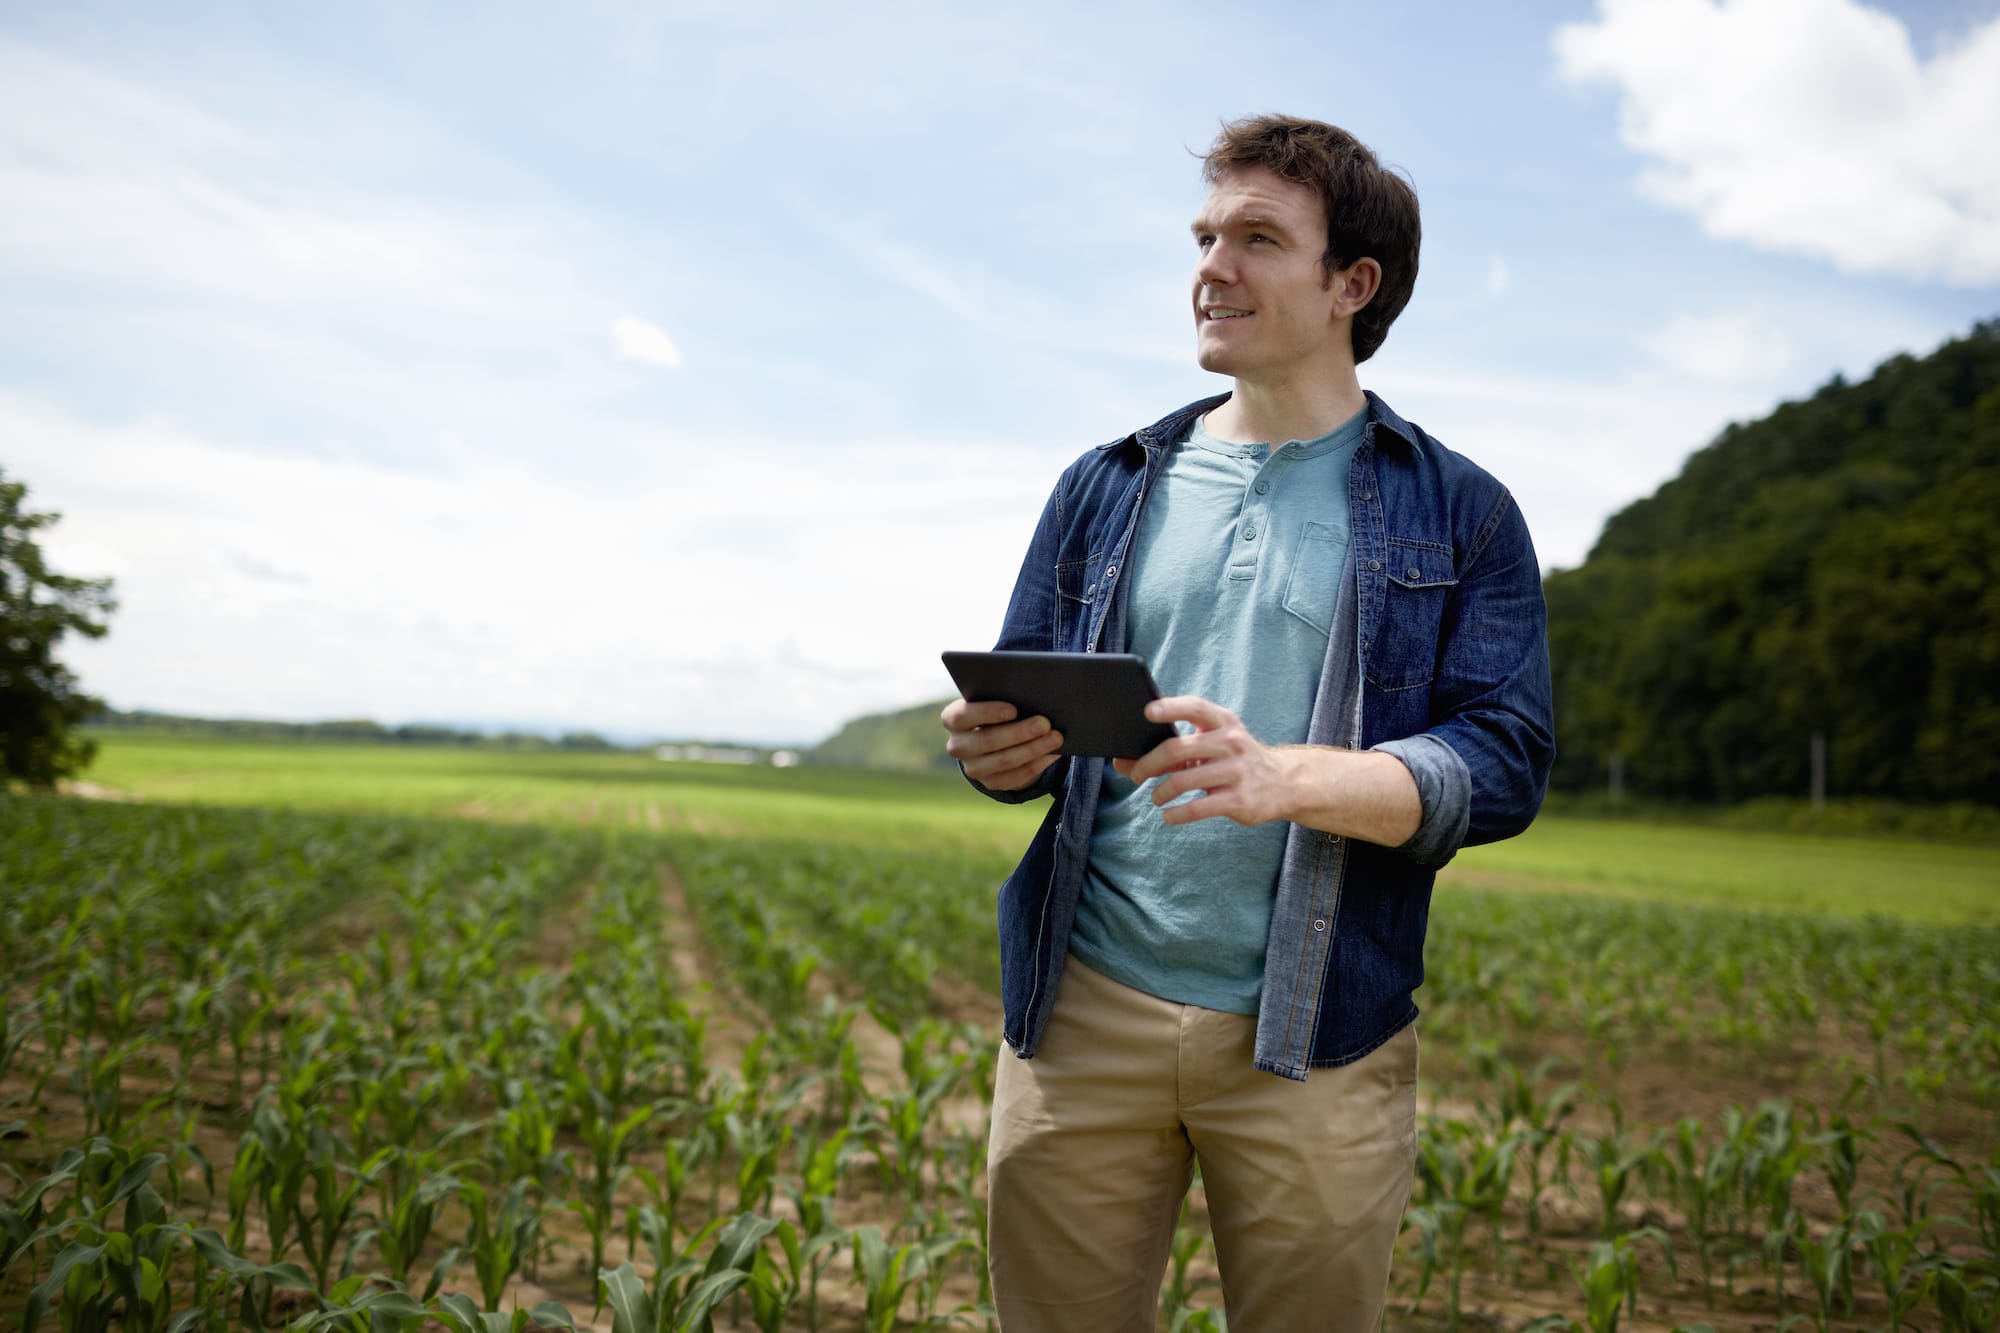 Farmers are taking agtech into the field everyday to make effective decisions.